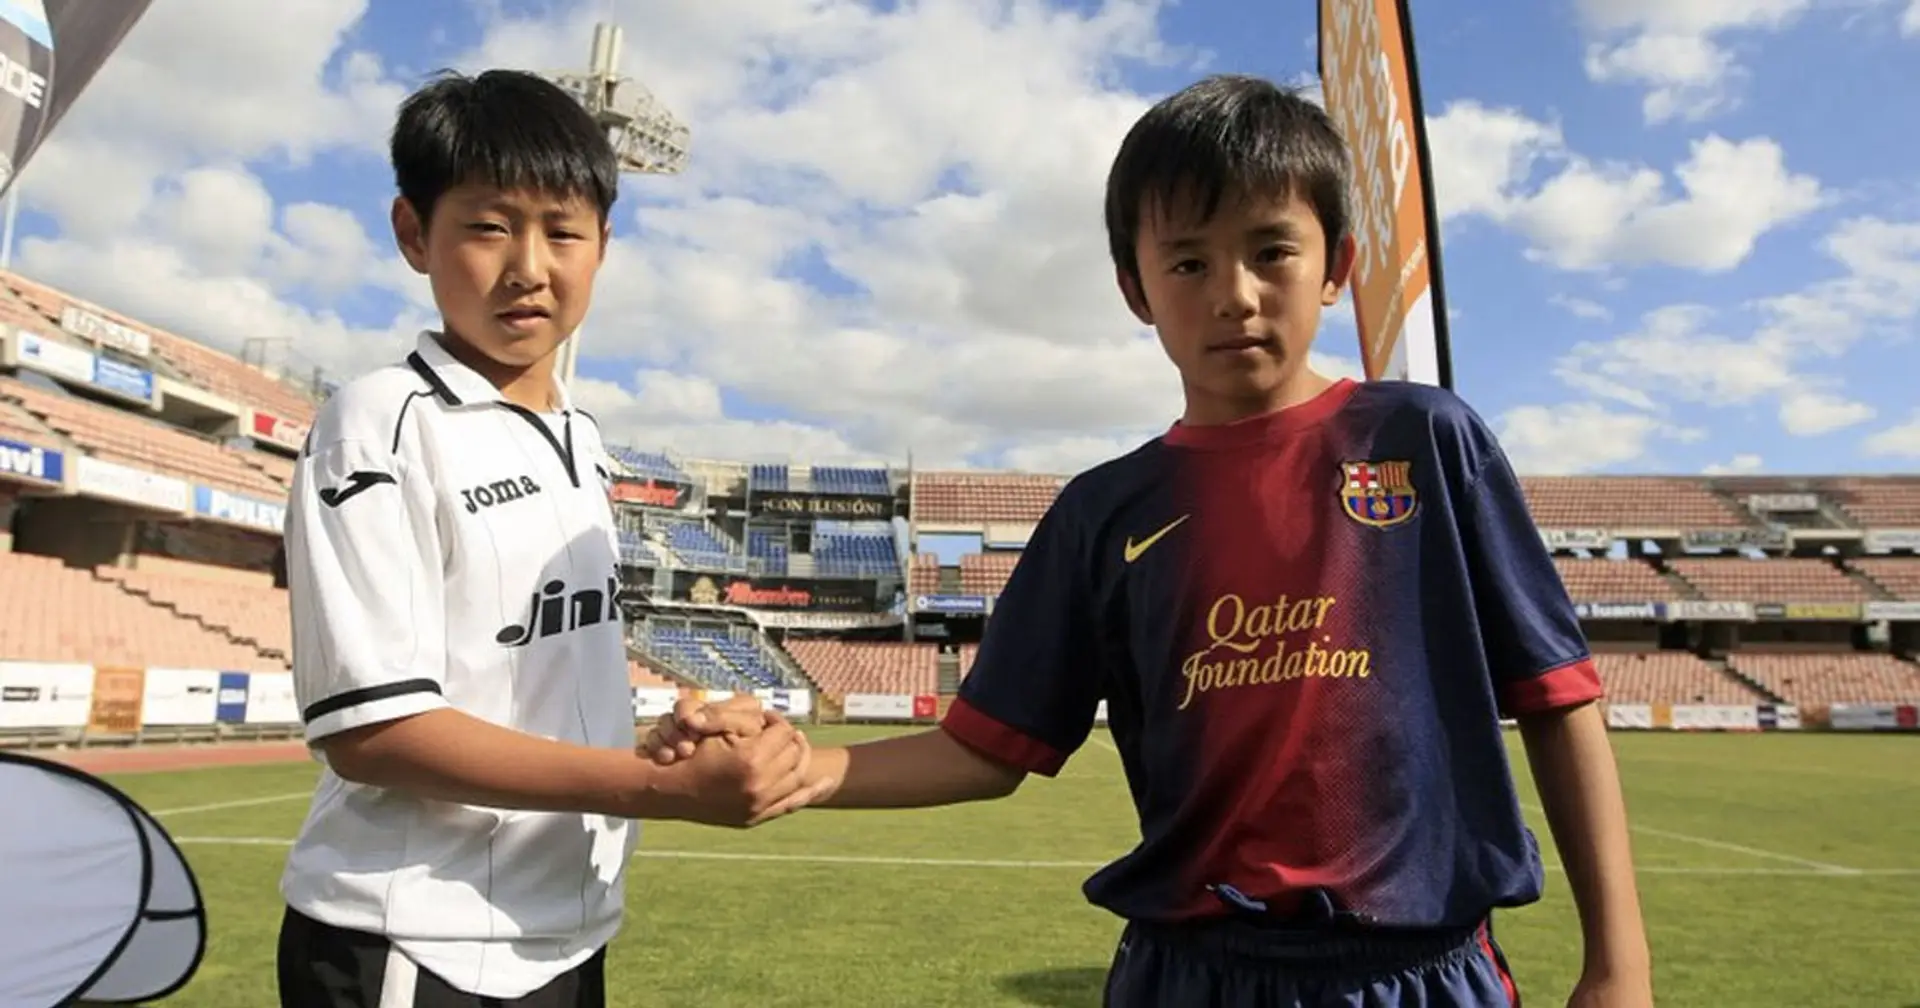 Former Barca gem Kubo set to replicate La Masia photo in Champions League knockout